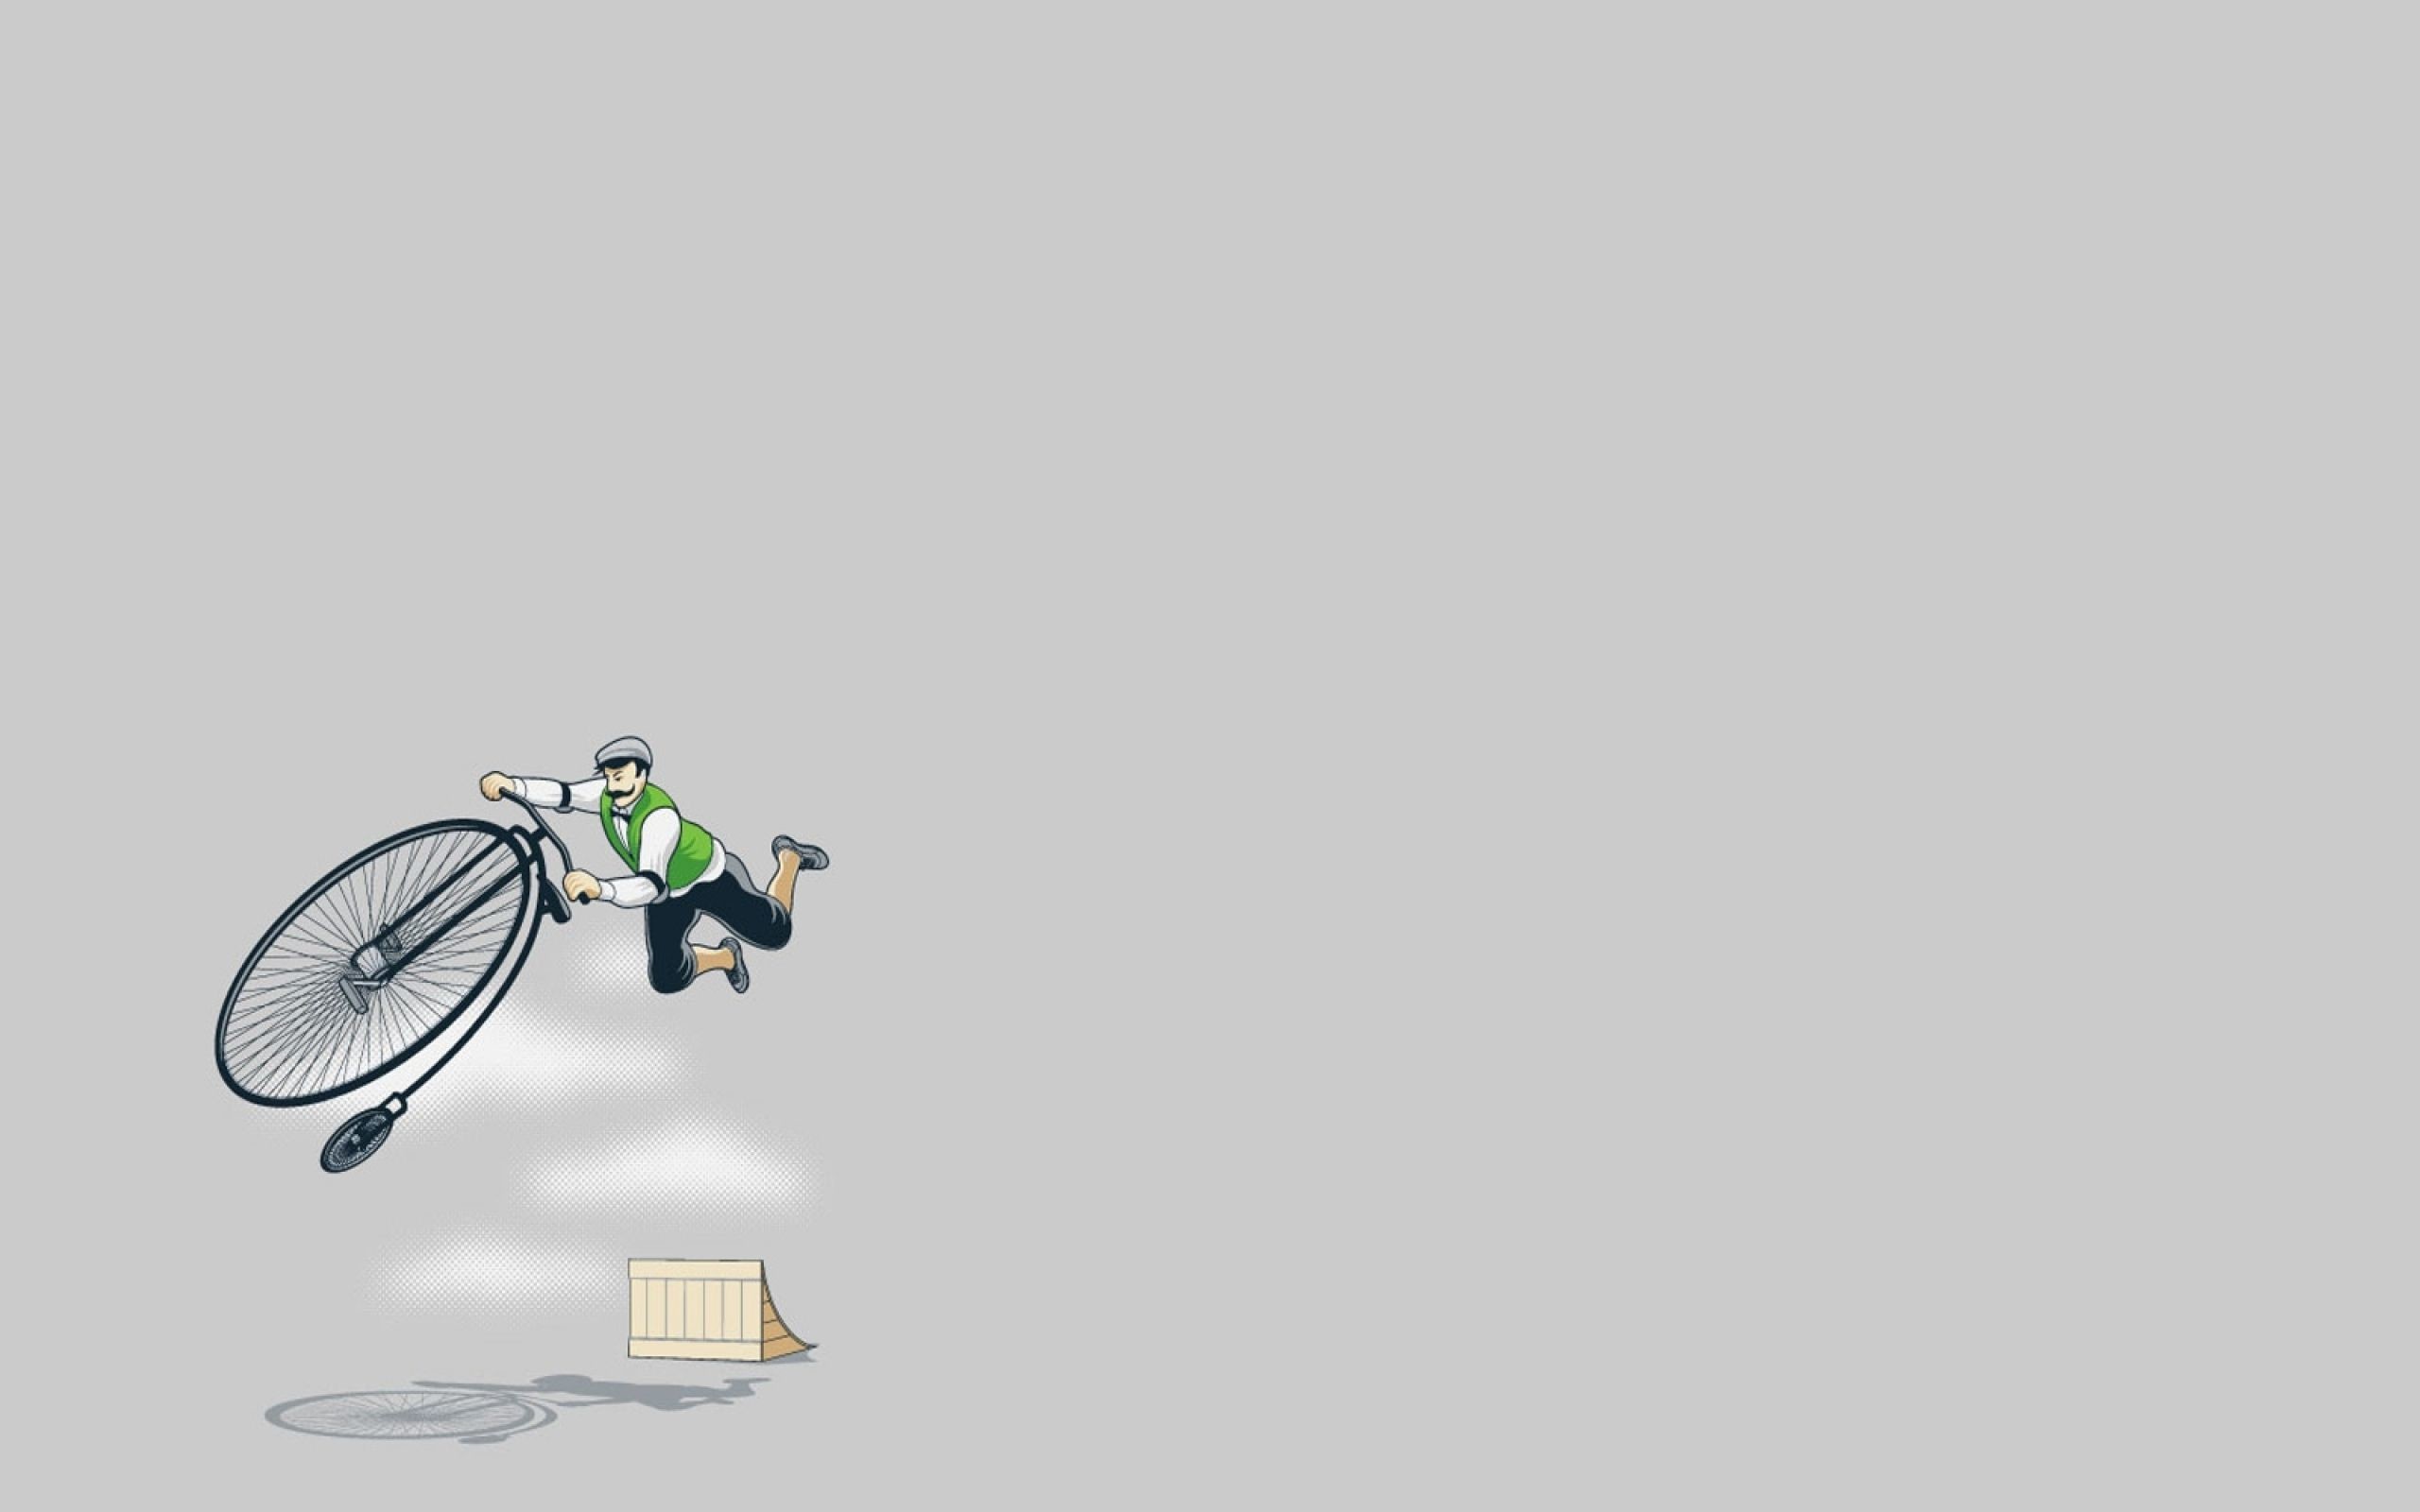 2560x1600 ... Falling with the bicycle